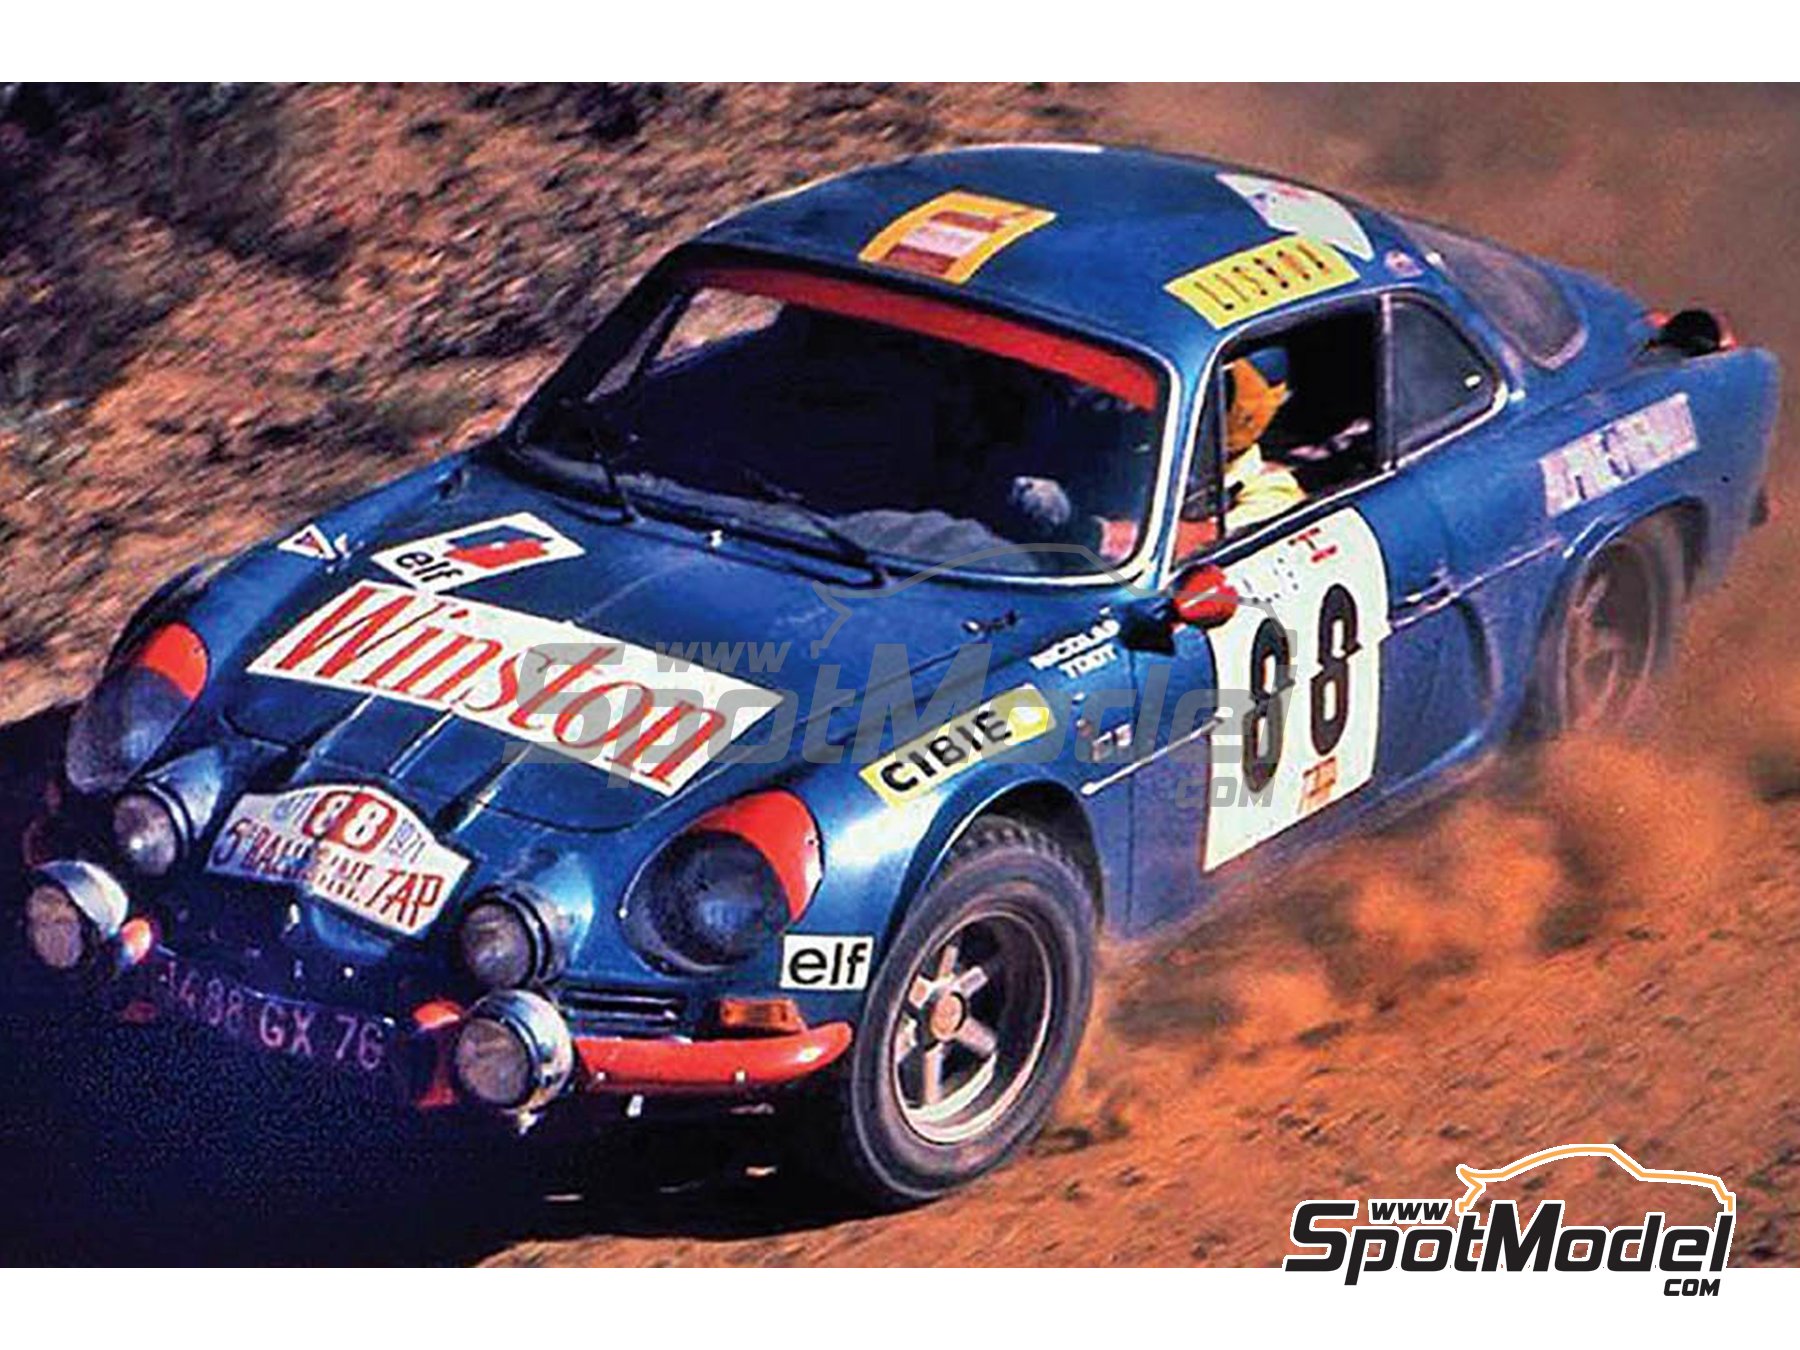 DECALS 1/24 REF 614 ALPINE RENAULT A110 MOUTON RALLYE MONTE CARLO 1976 RALLY WRC 